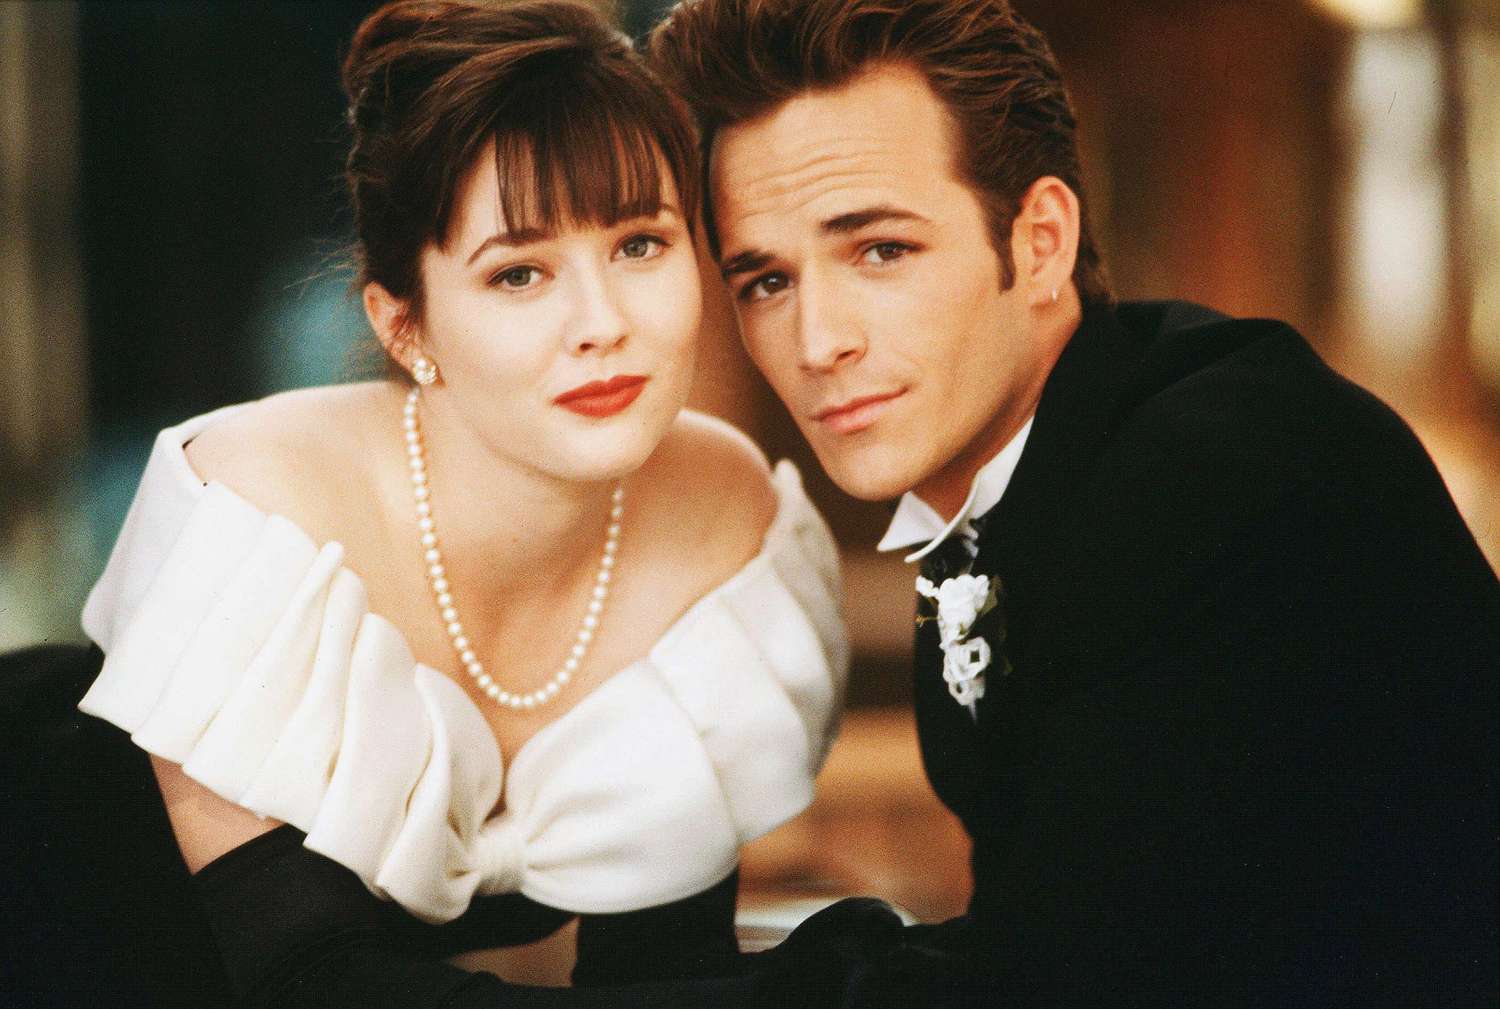 Shannen Doherty and Luke Perry Had a ‘Special Kind of Love’ as Friends [Video]